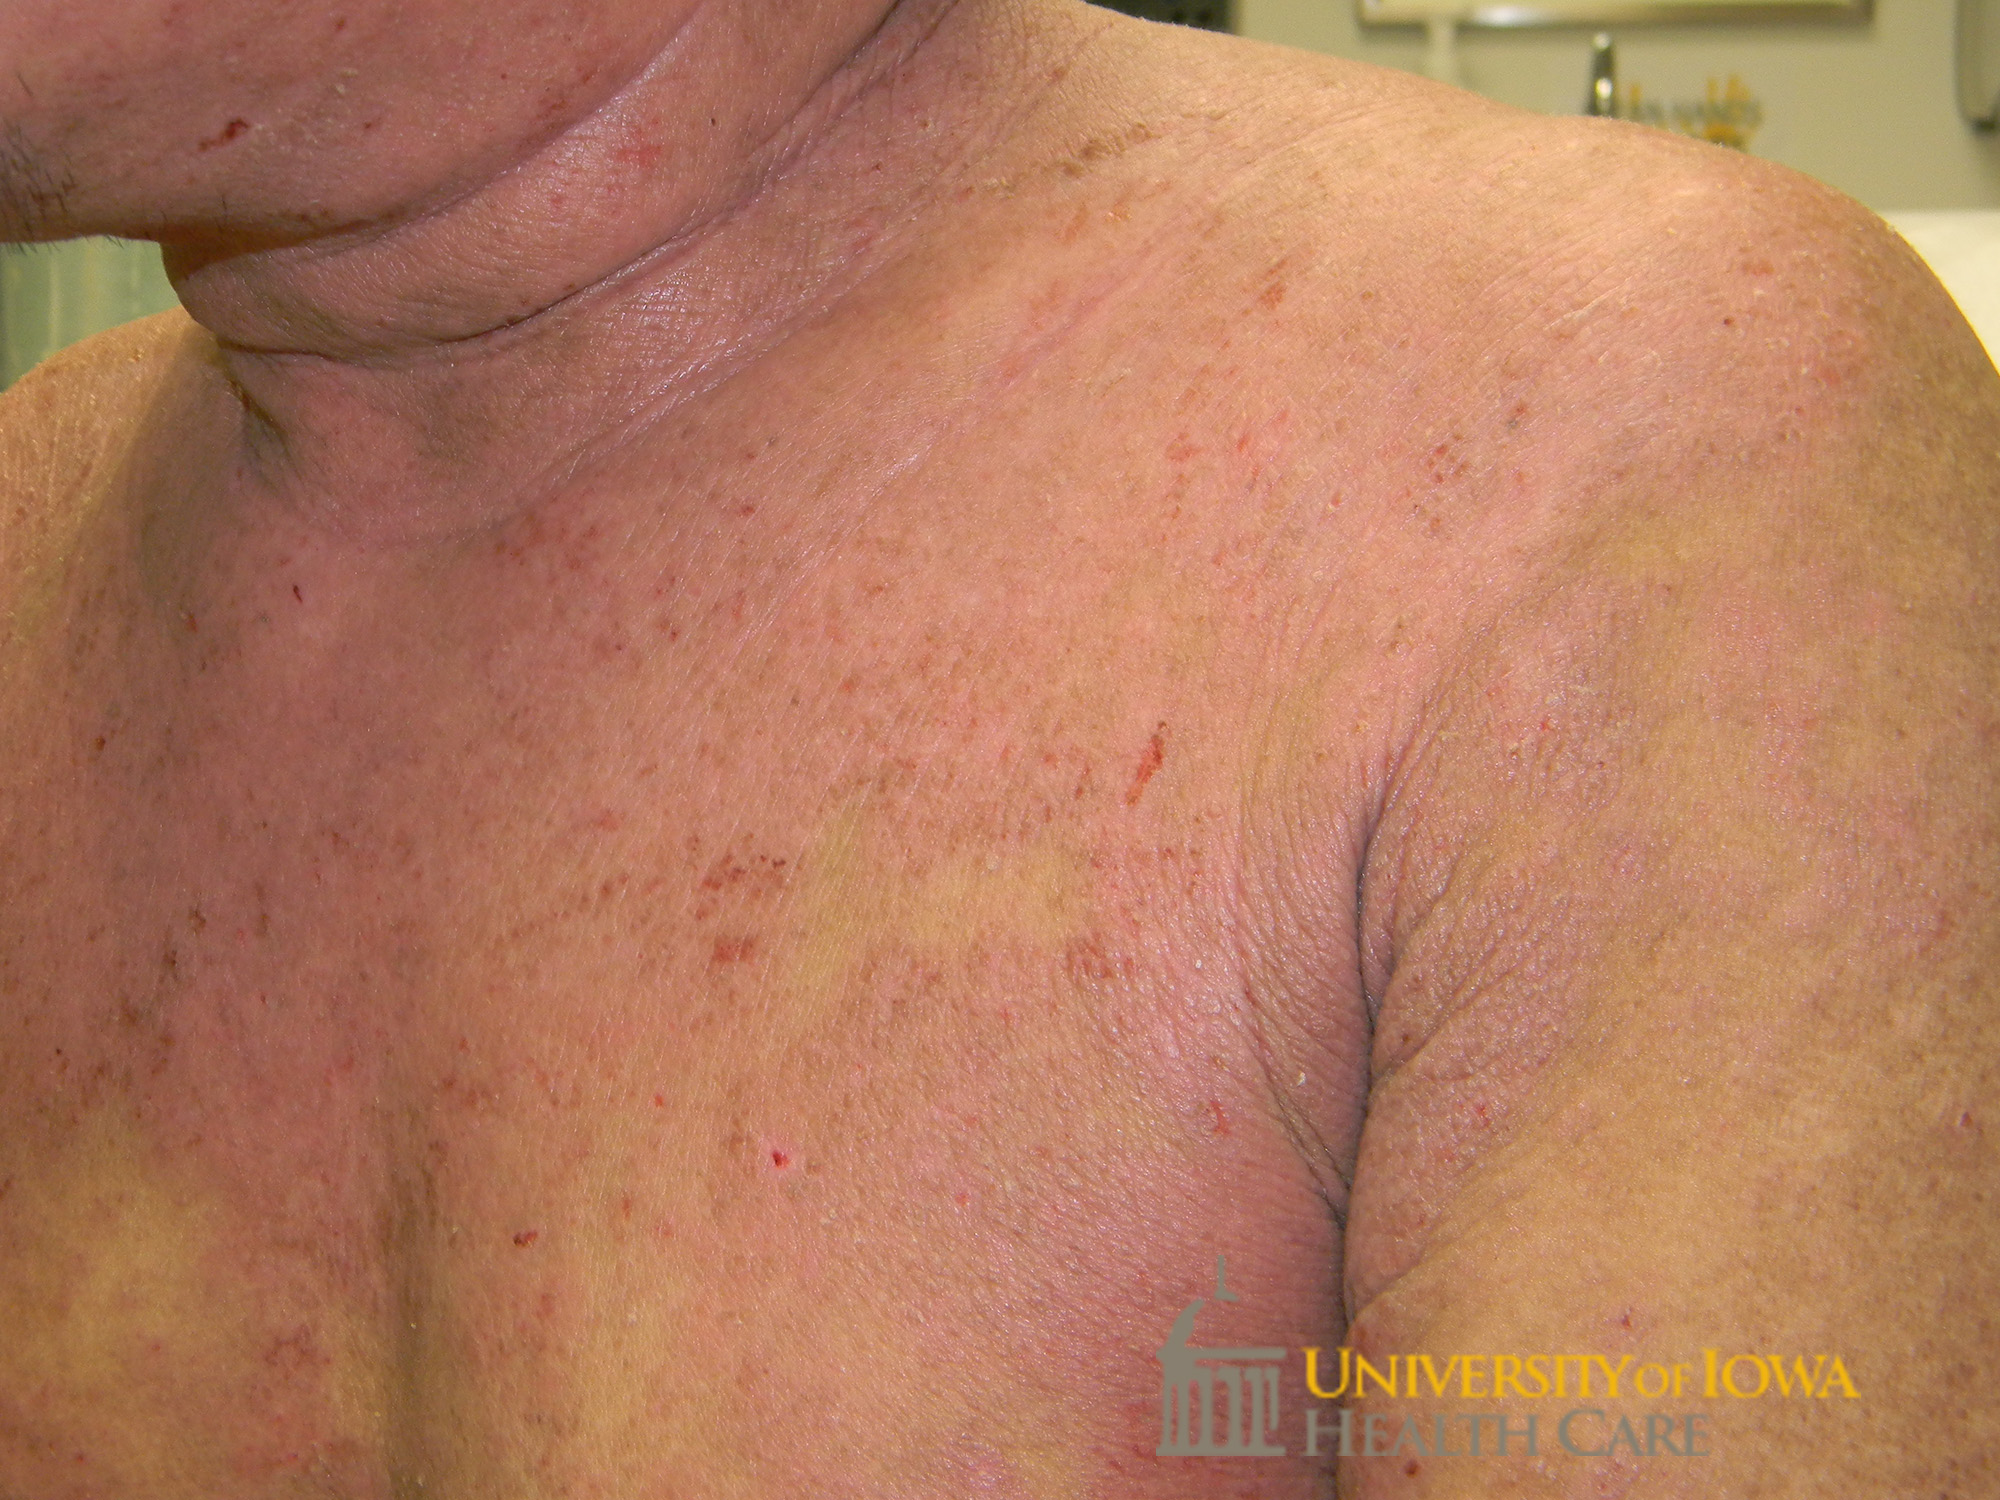 Erythematous scaly plaques with fissures and the trunk and extremities. (click images for higher resolution).